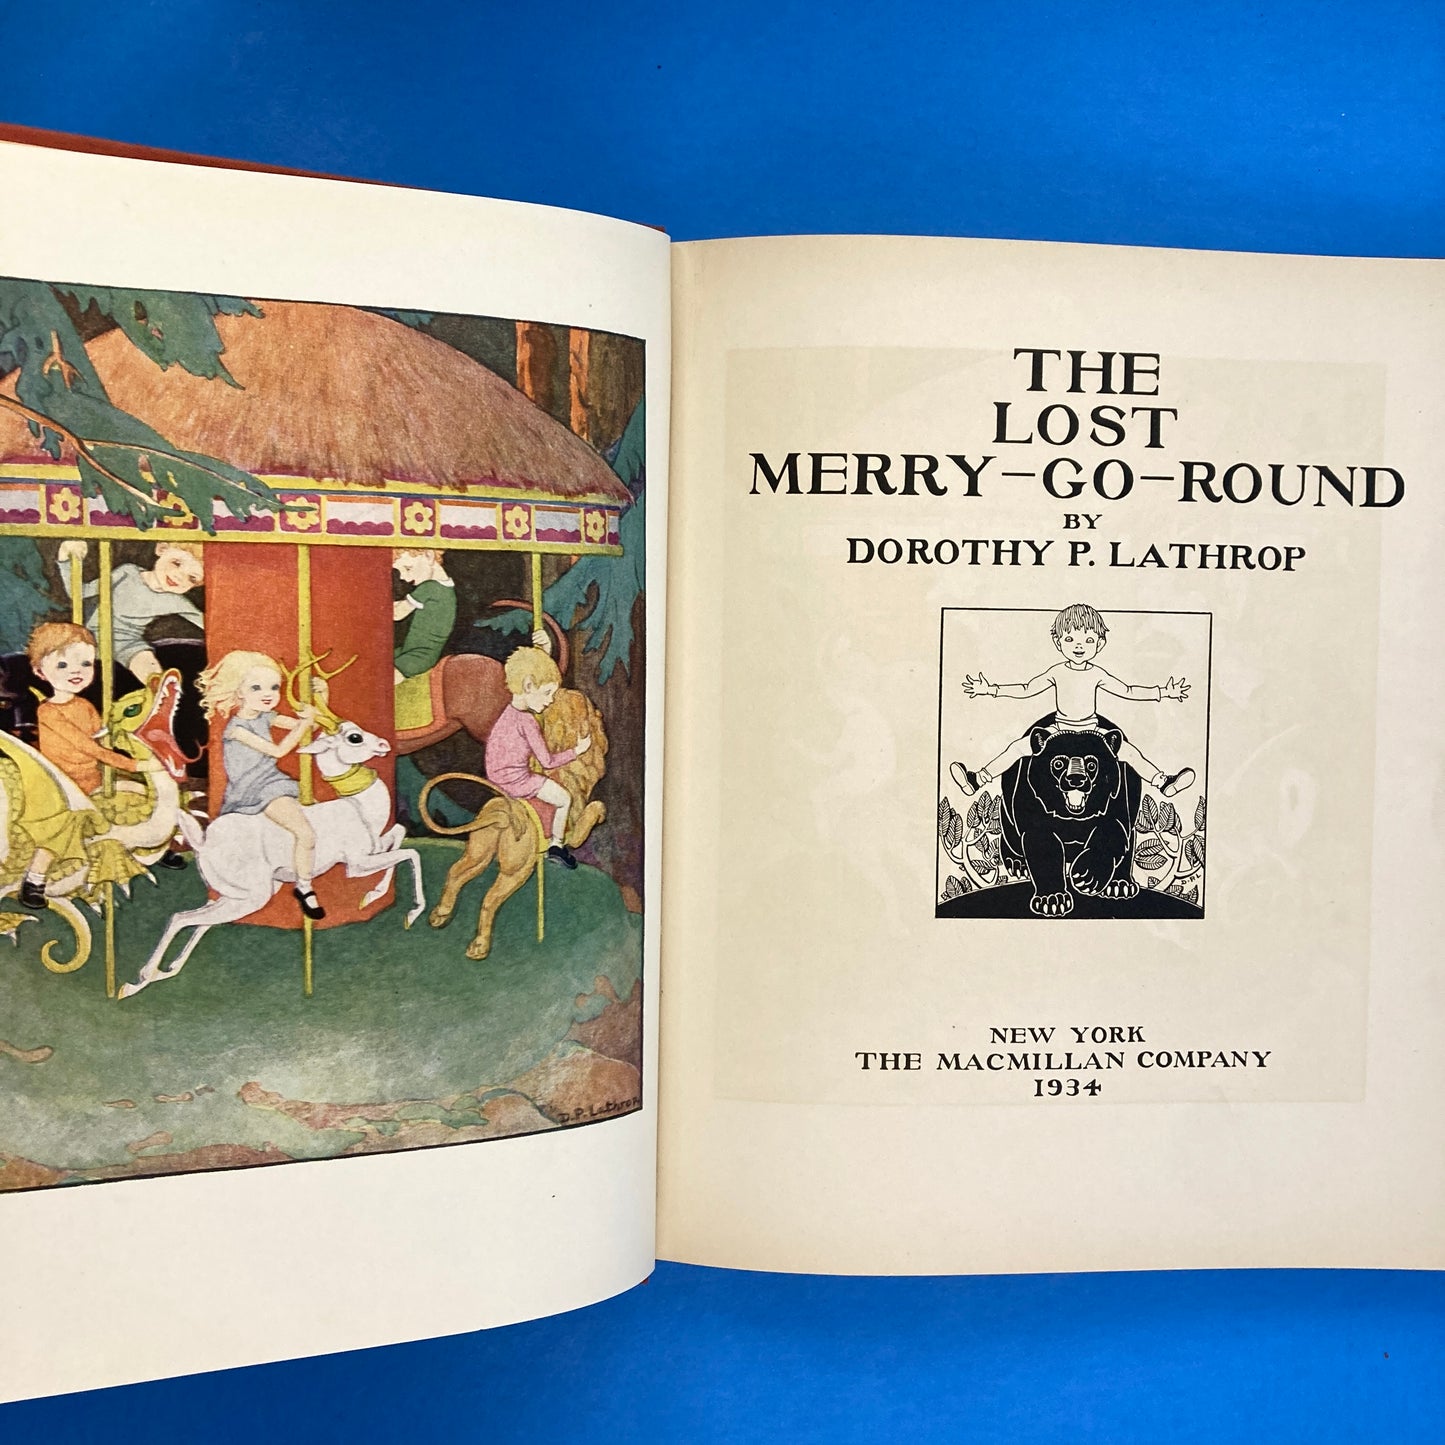 The Lost Merry-Go-Round